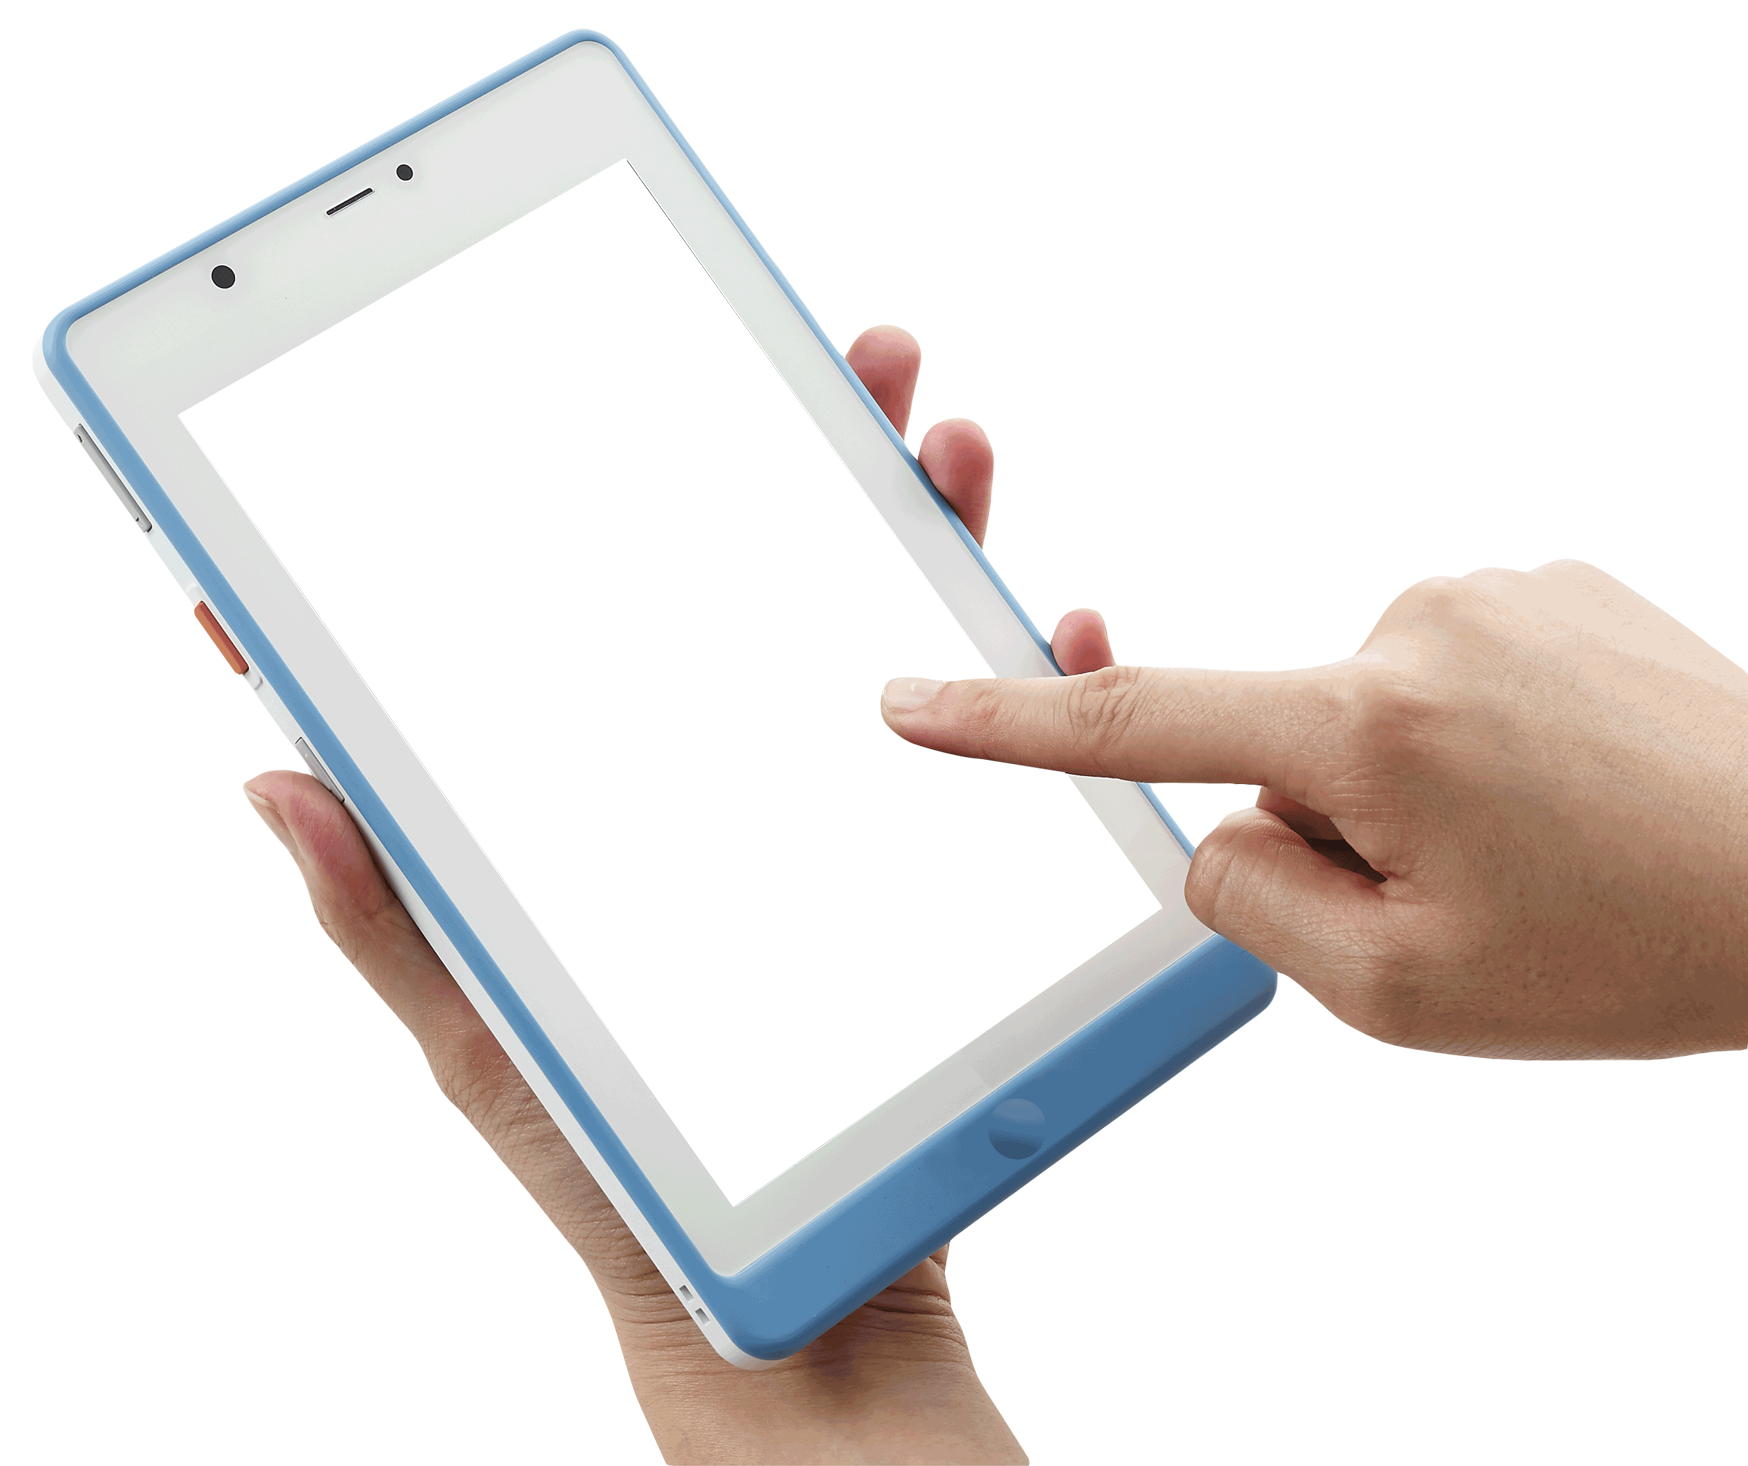 Ipad Finger Touch PNG Image